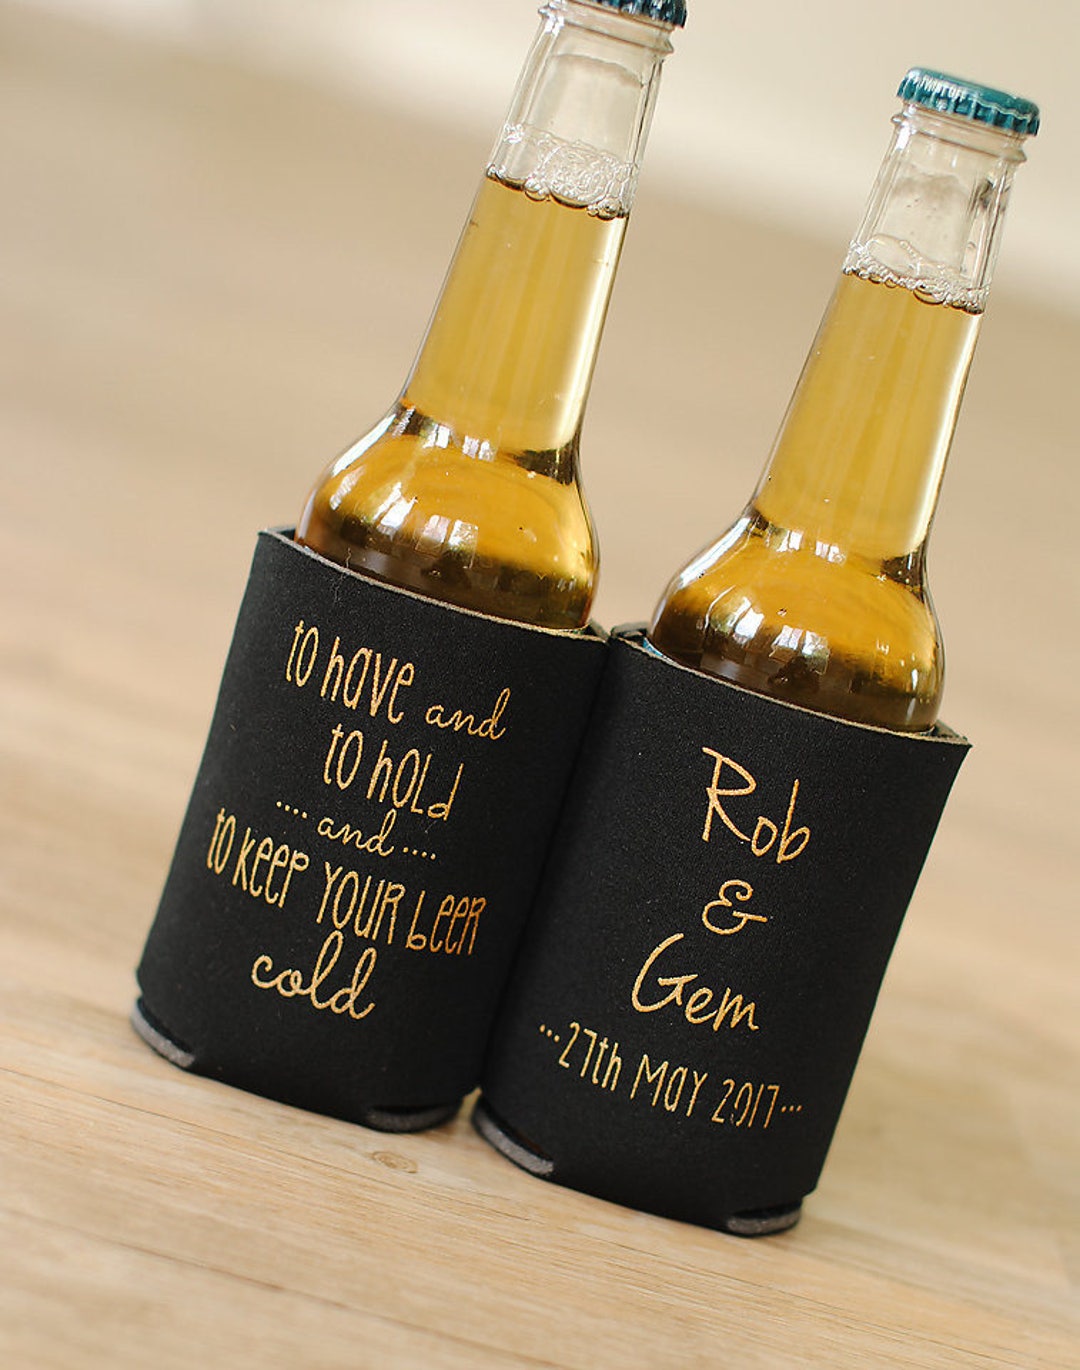 To Have and to Hold and to Keep Your Beer Cold Personalized Wedding Can  Coolers Wedding Favors for Guests, Welcome Bag Ideas, Fall Wedding 